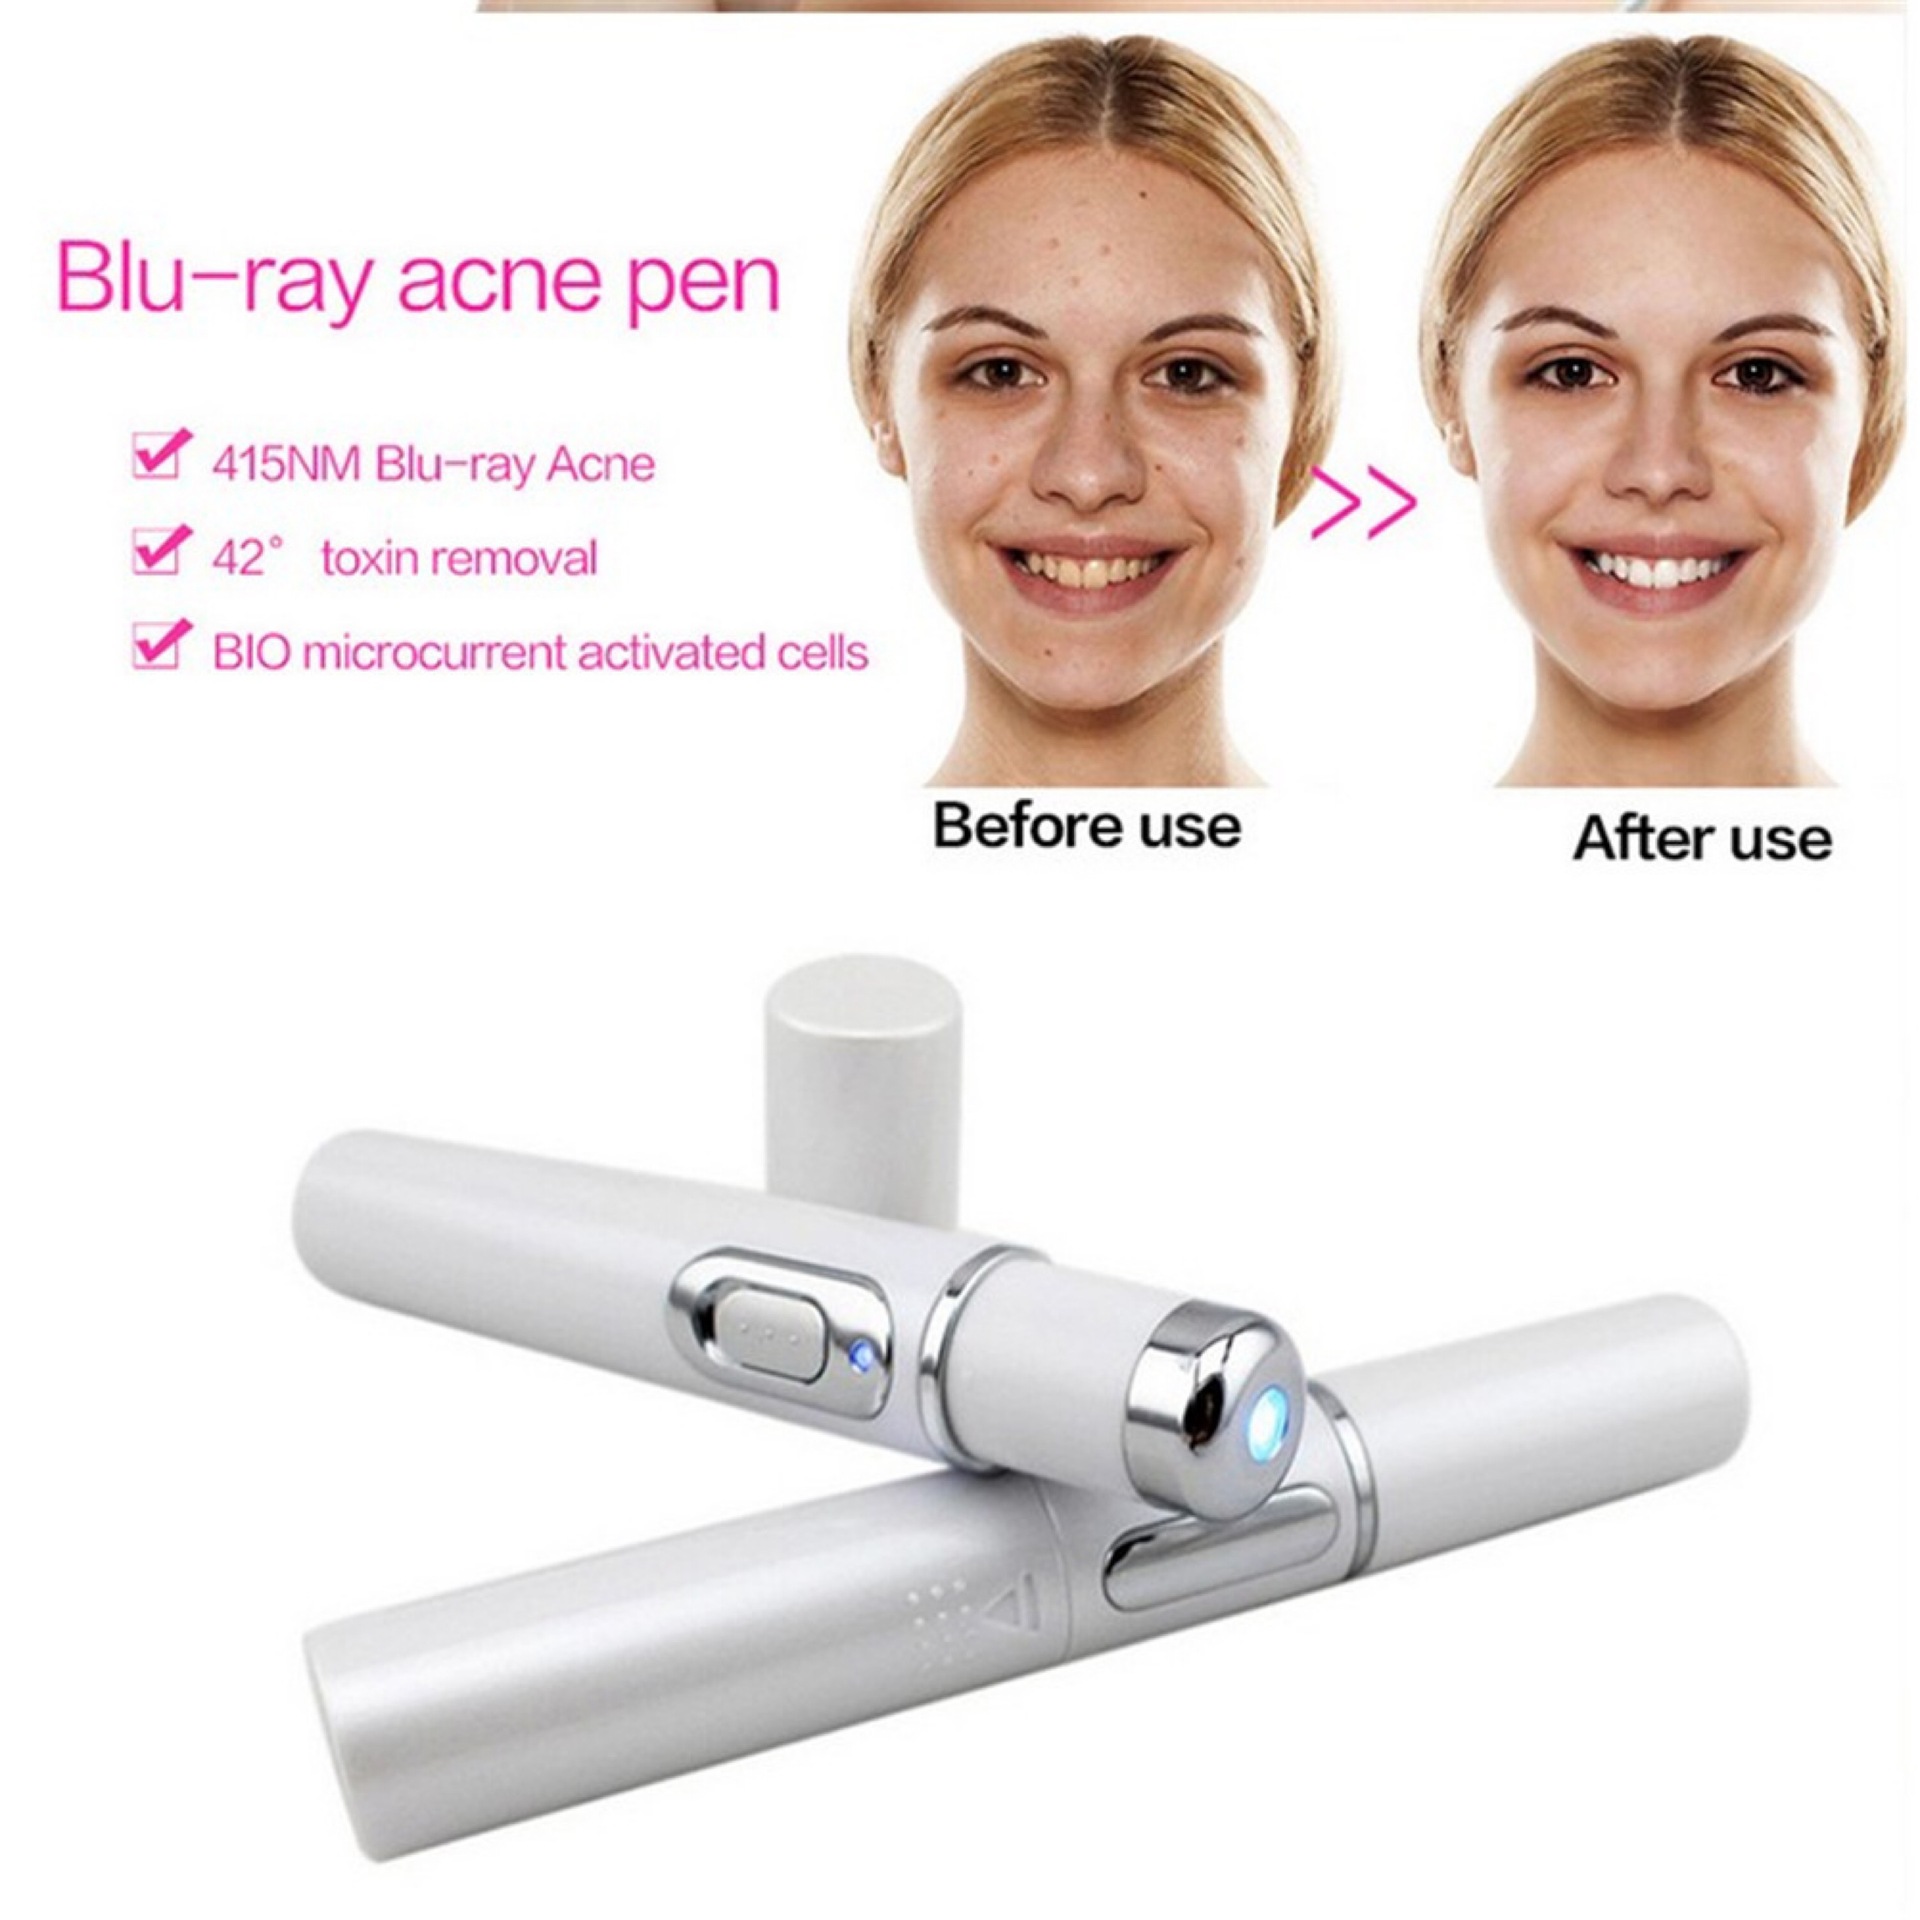 Instructions for use portable beauty pen for removing acne, scar, wrinkle, skin blemish, pimples, swelling zits, redness, inflammation